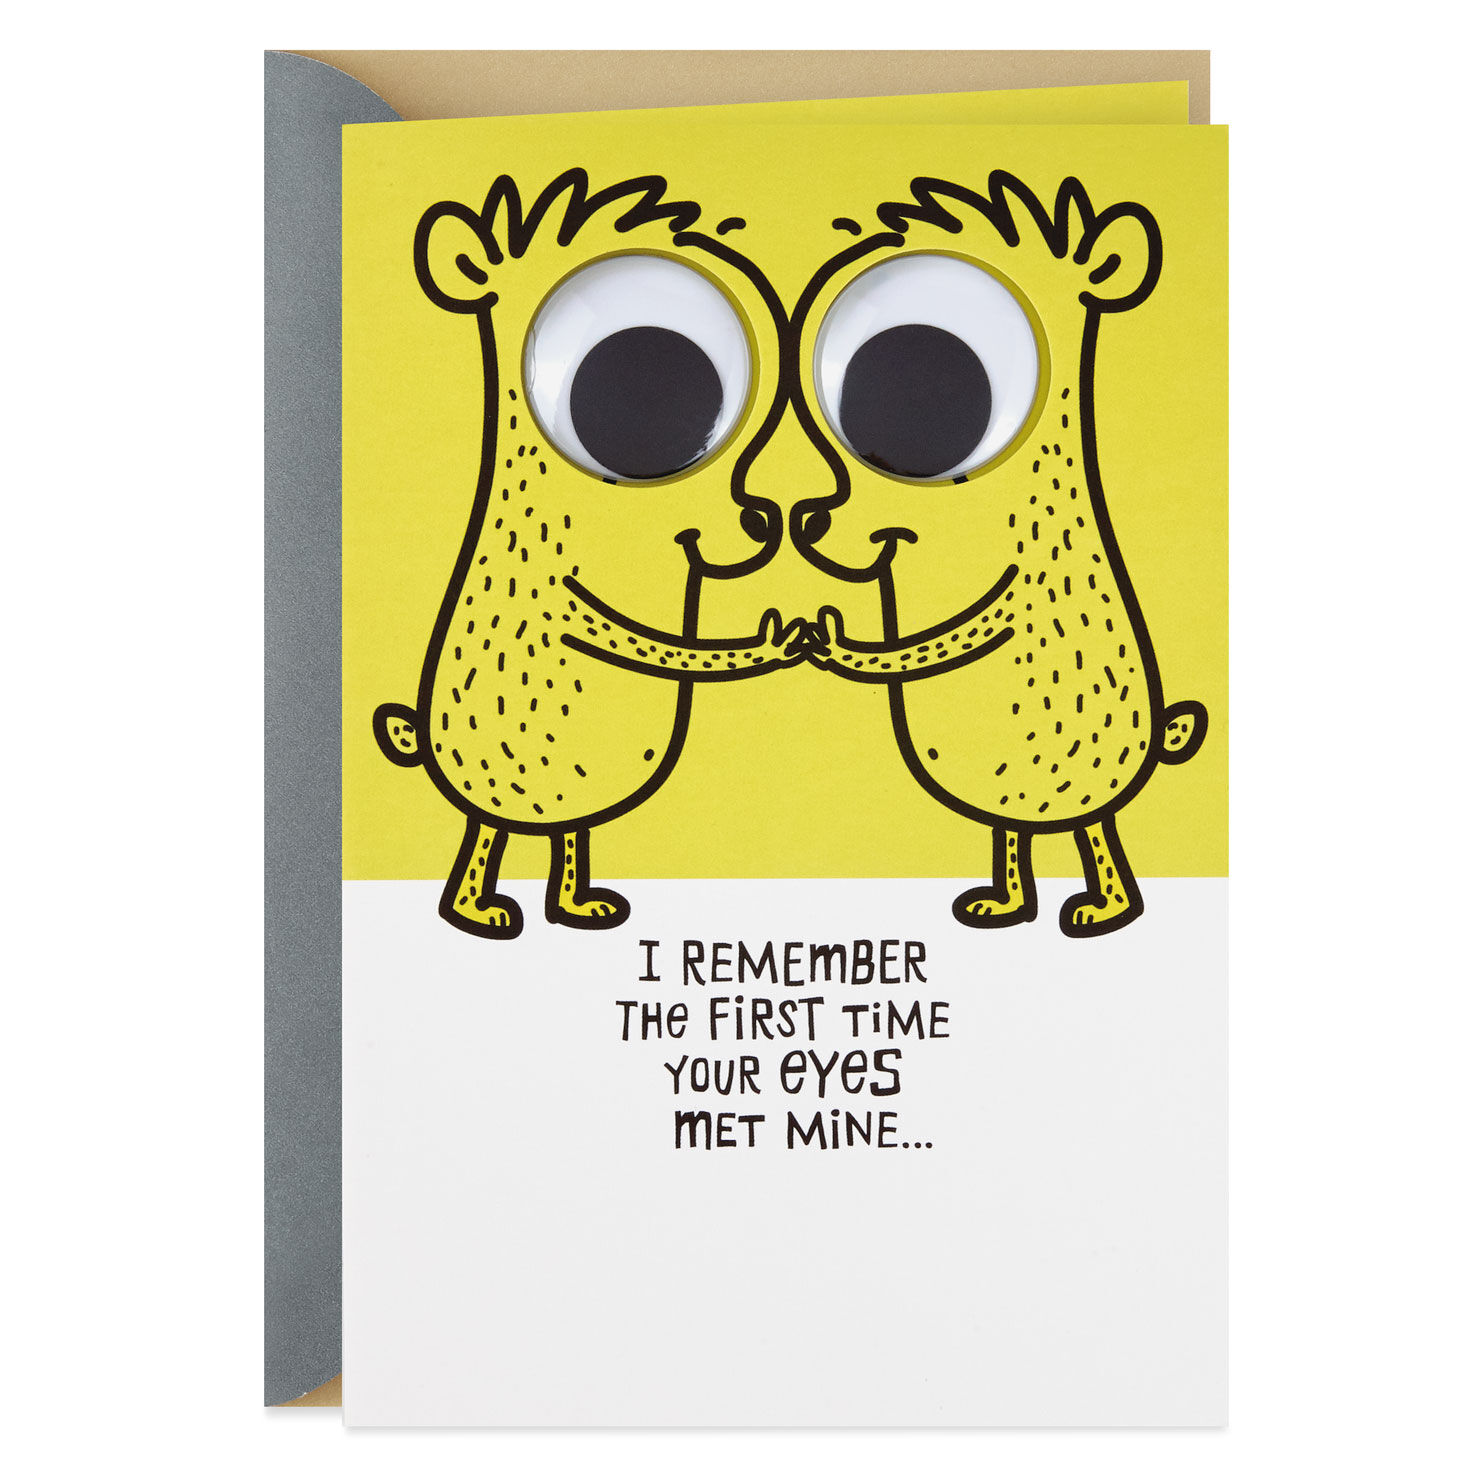 I Only Have Eyes For You Anniversary Card  Love Heart Eyes Pun Valentine  Card or Anniversary Card – And so to Shop